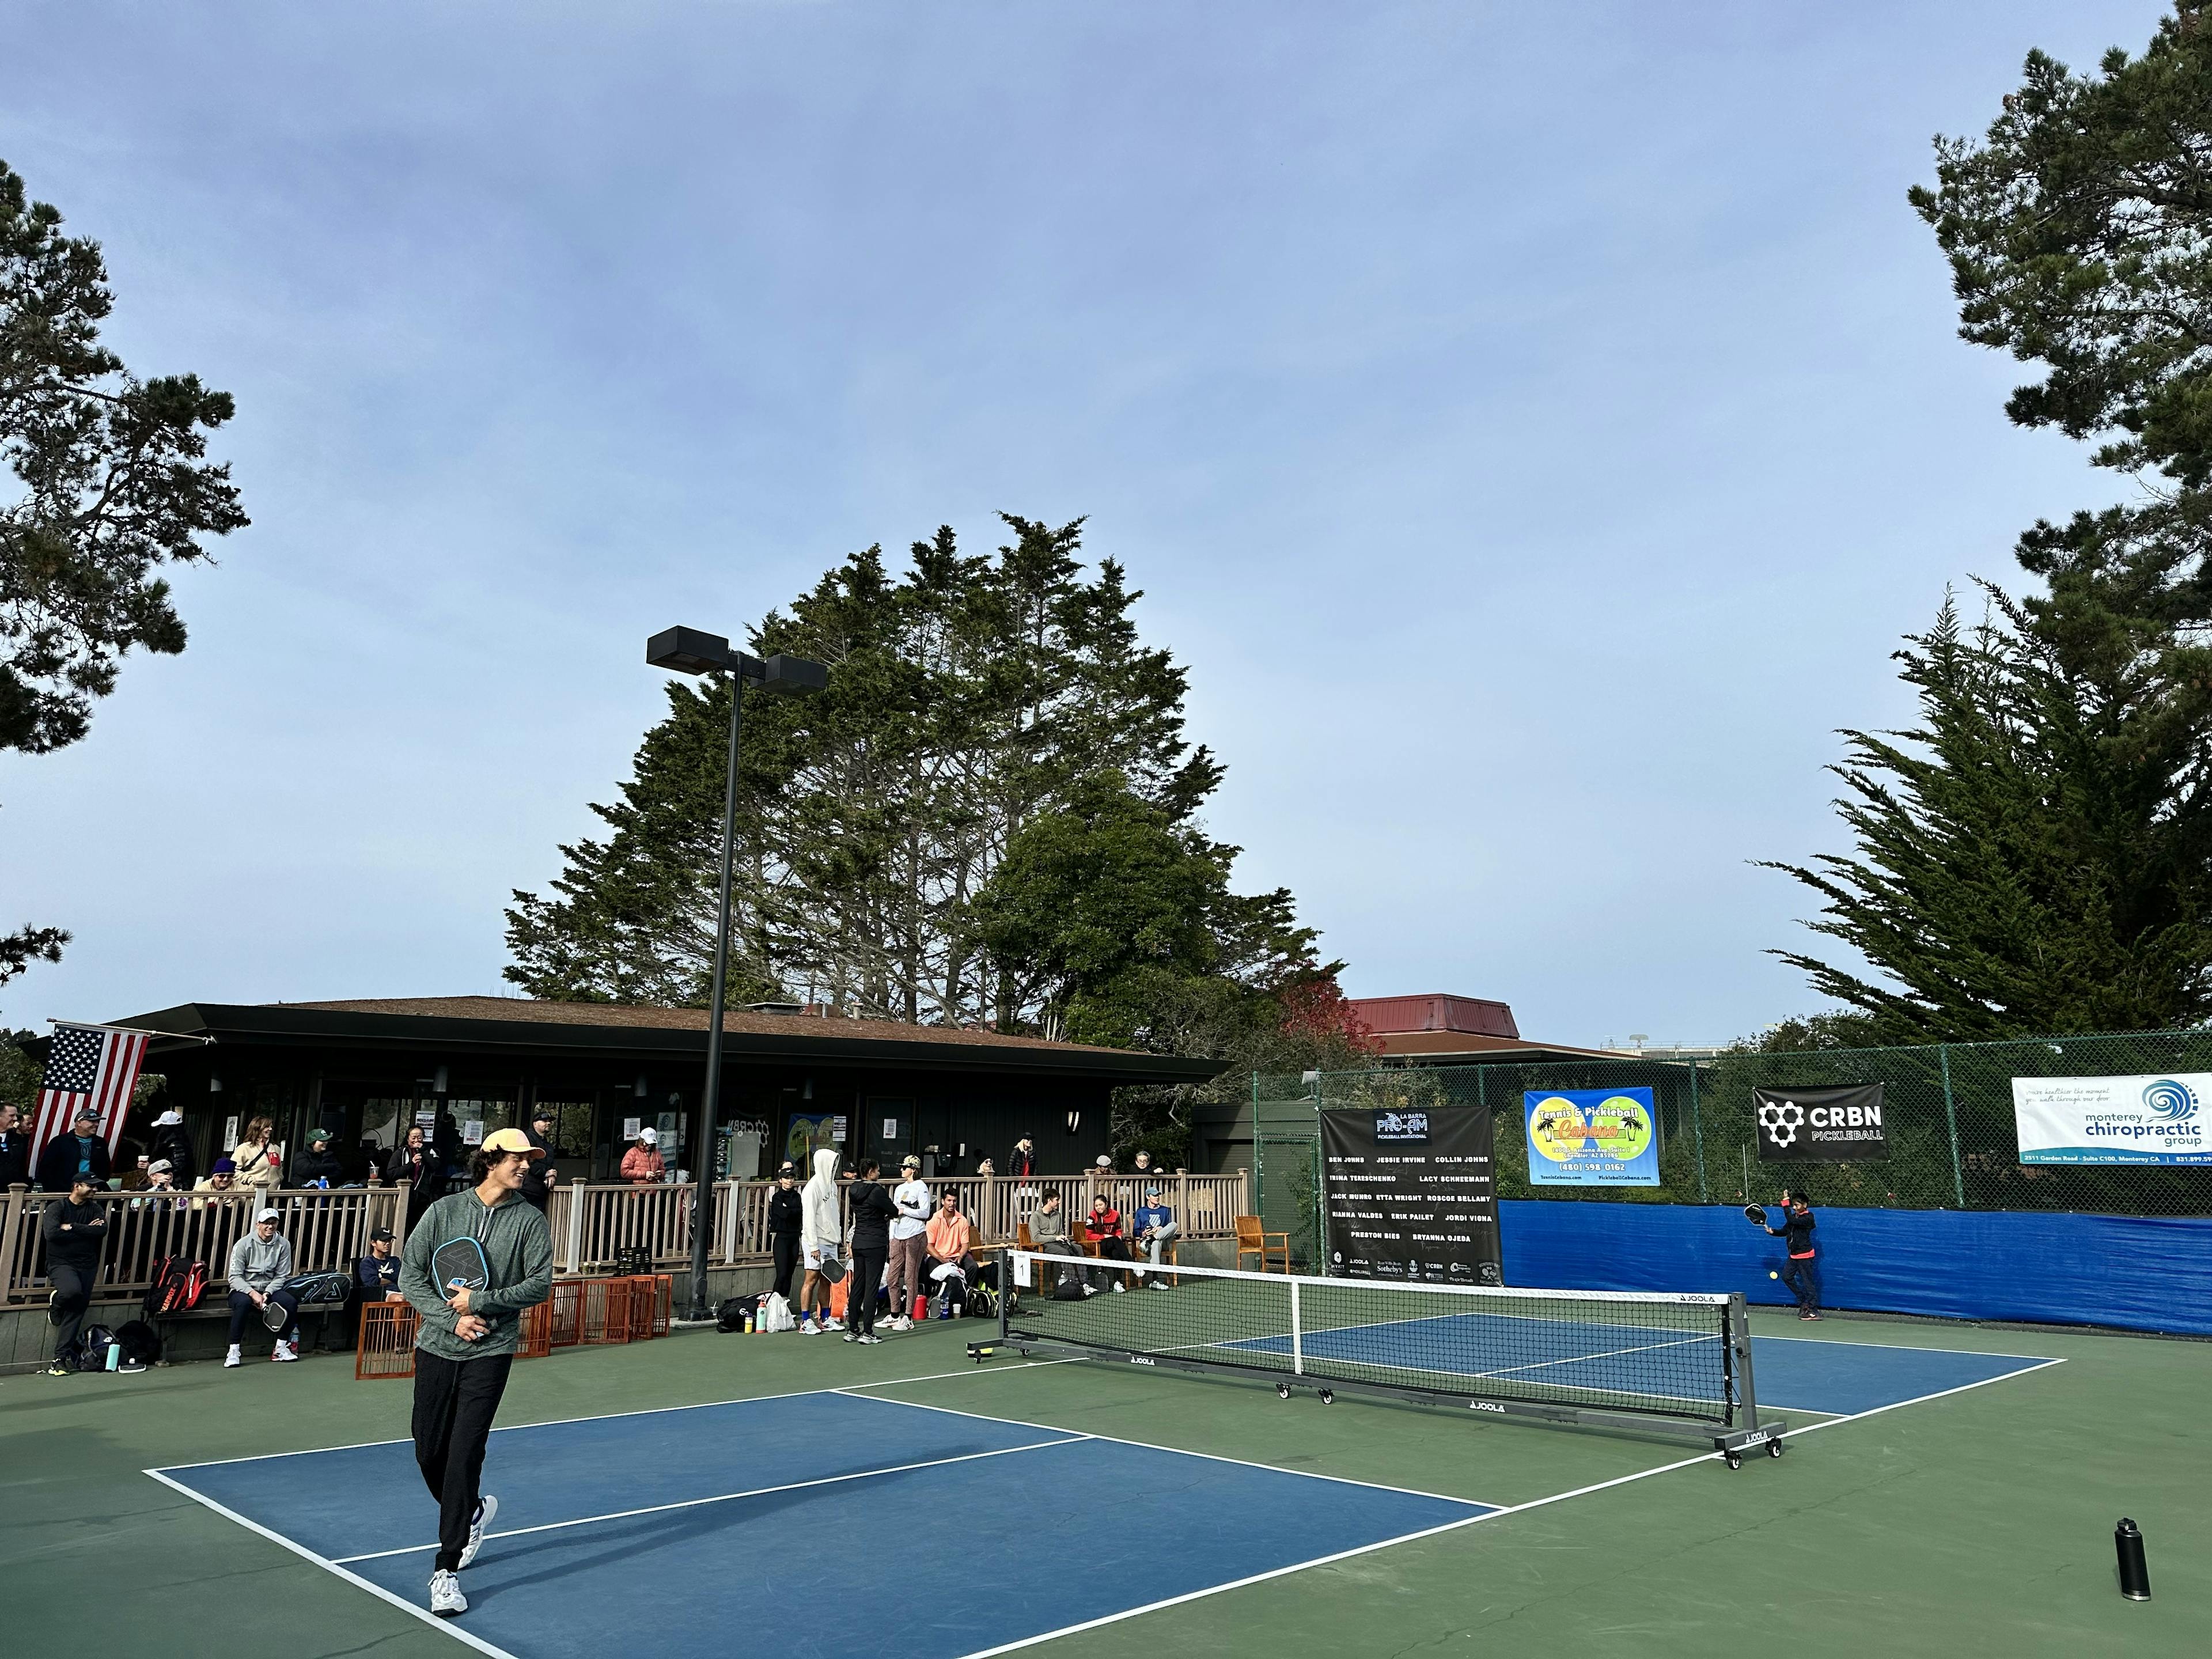 Image 4 of 9 of Monterey Bay Racquet Club court